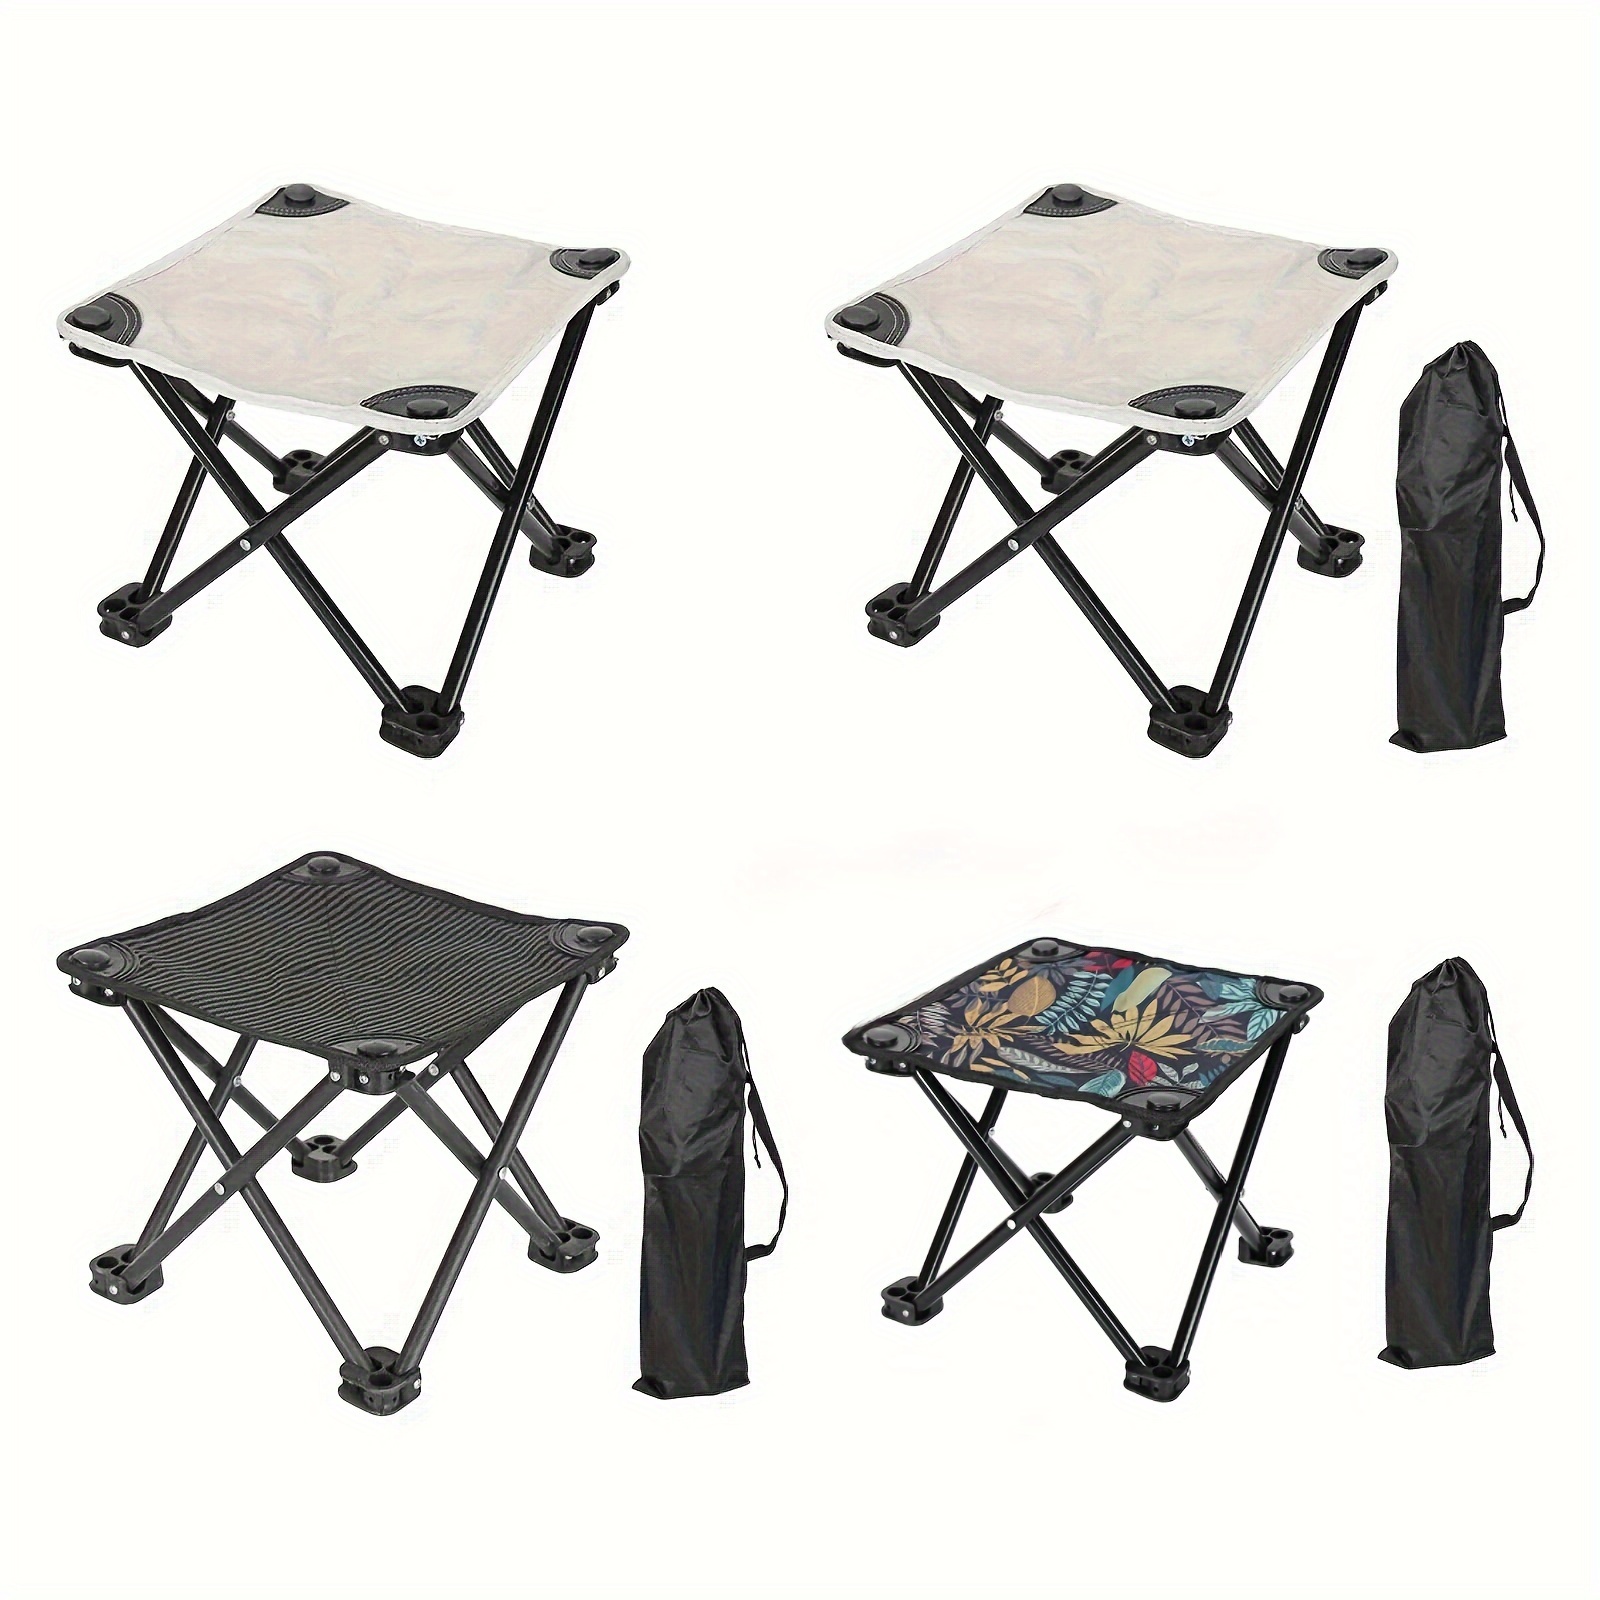 

Outdoor Portable Collapsible Stool Chair, Camping Folding Stool For Hiking Beach Travel Picnic Fishing Seat Tools